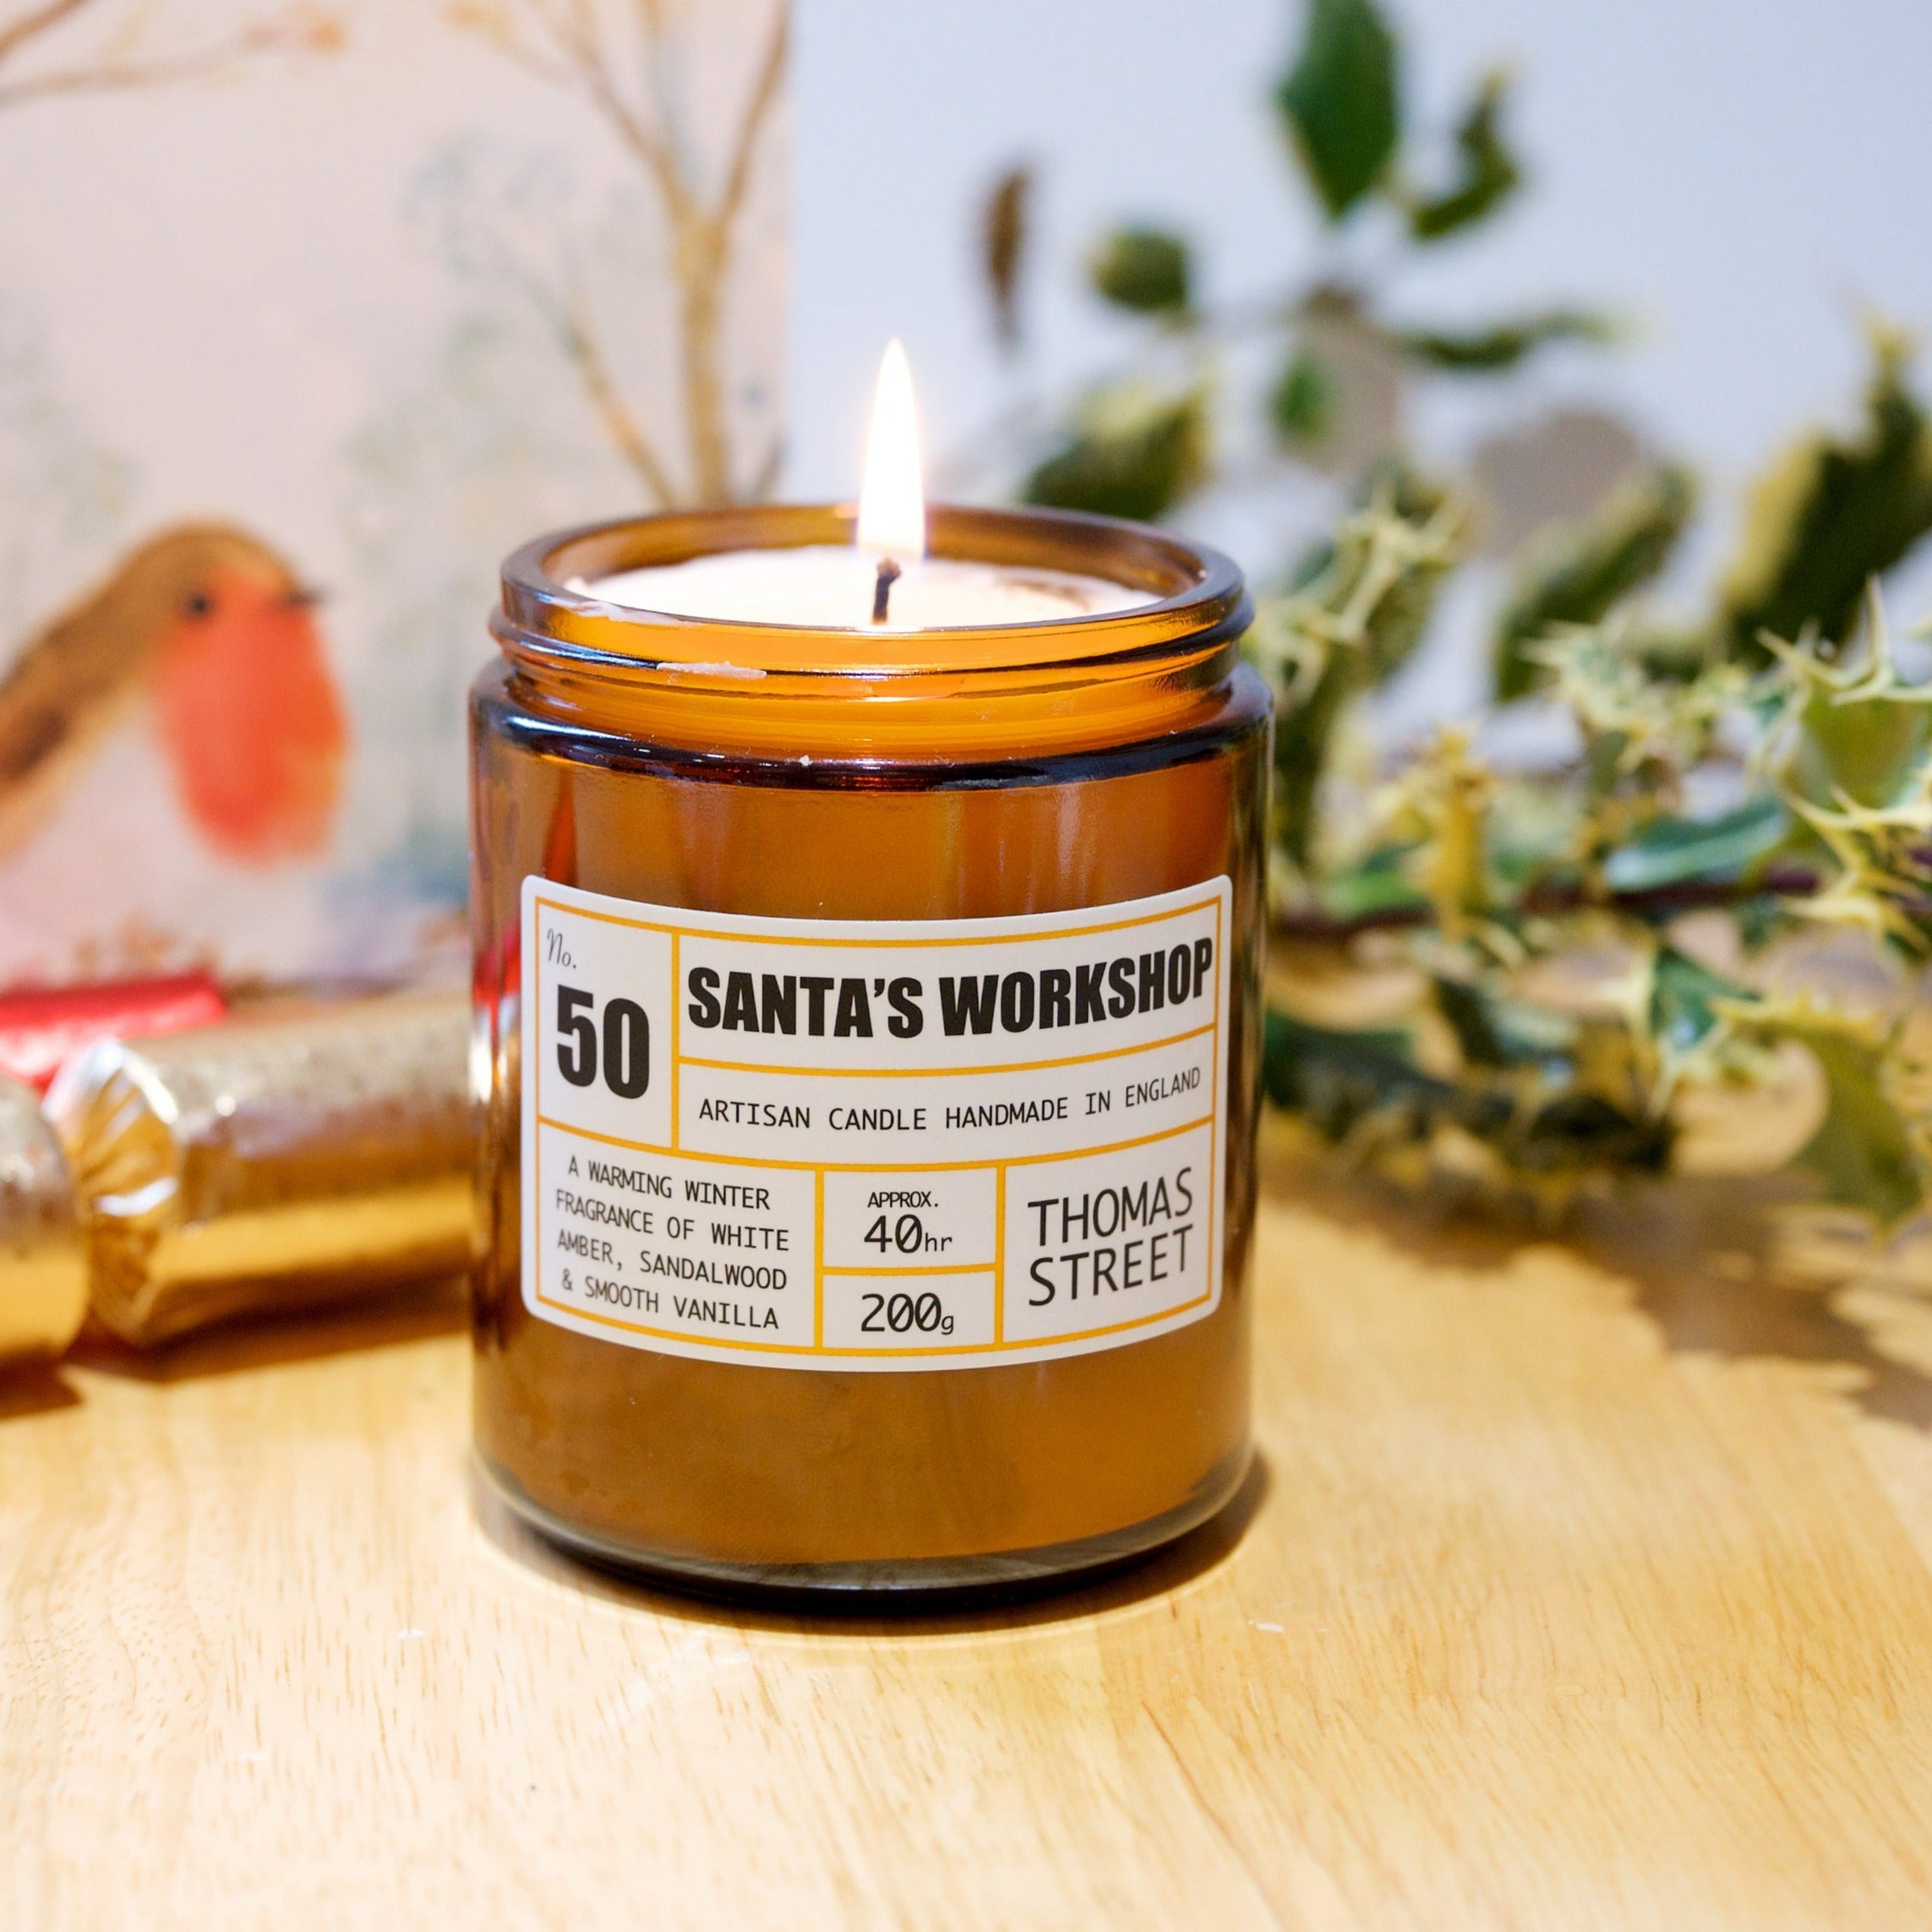 Thomas Street Santa's Workshop Scented Candle